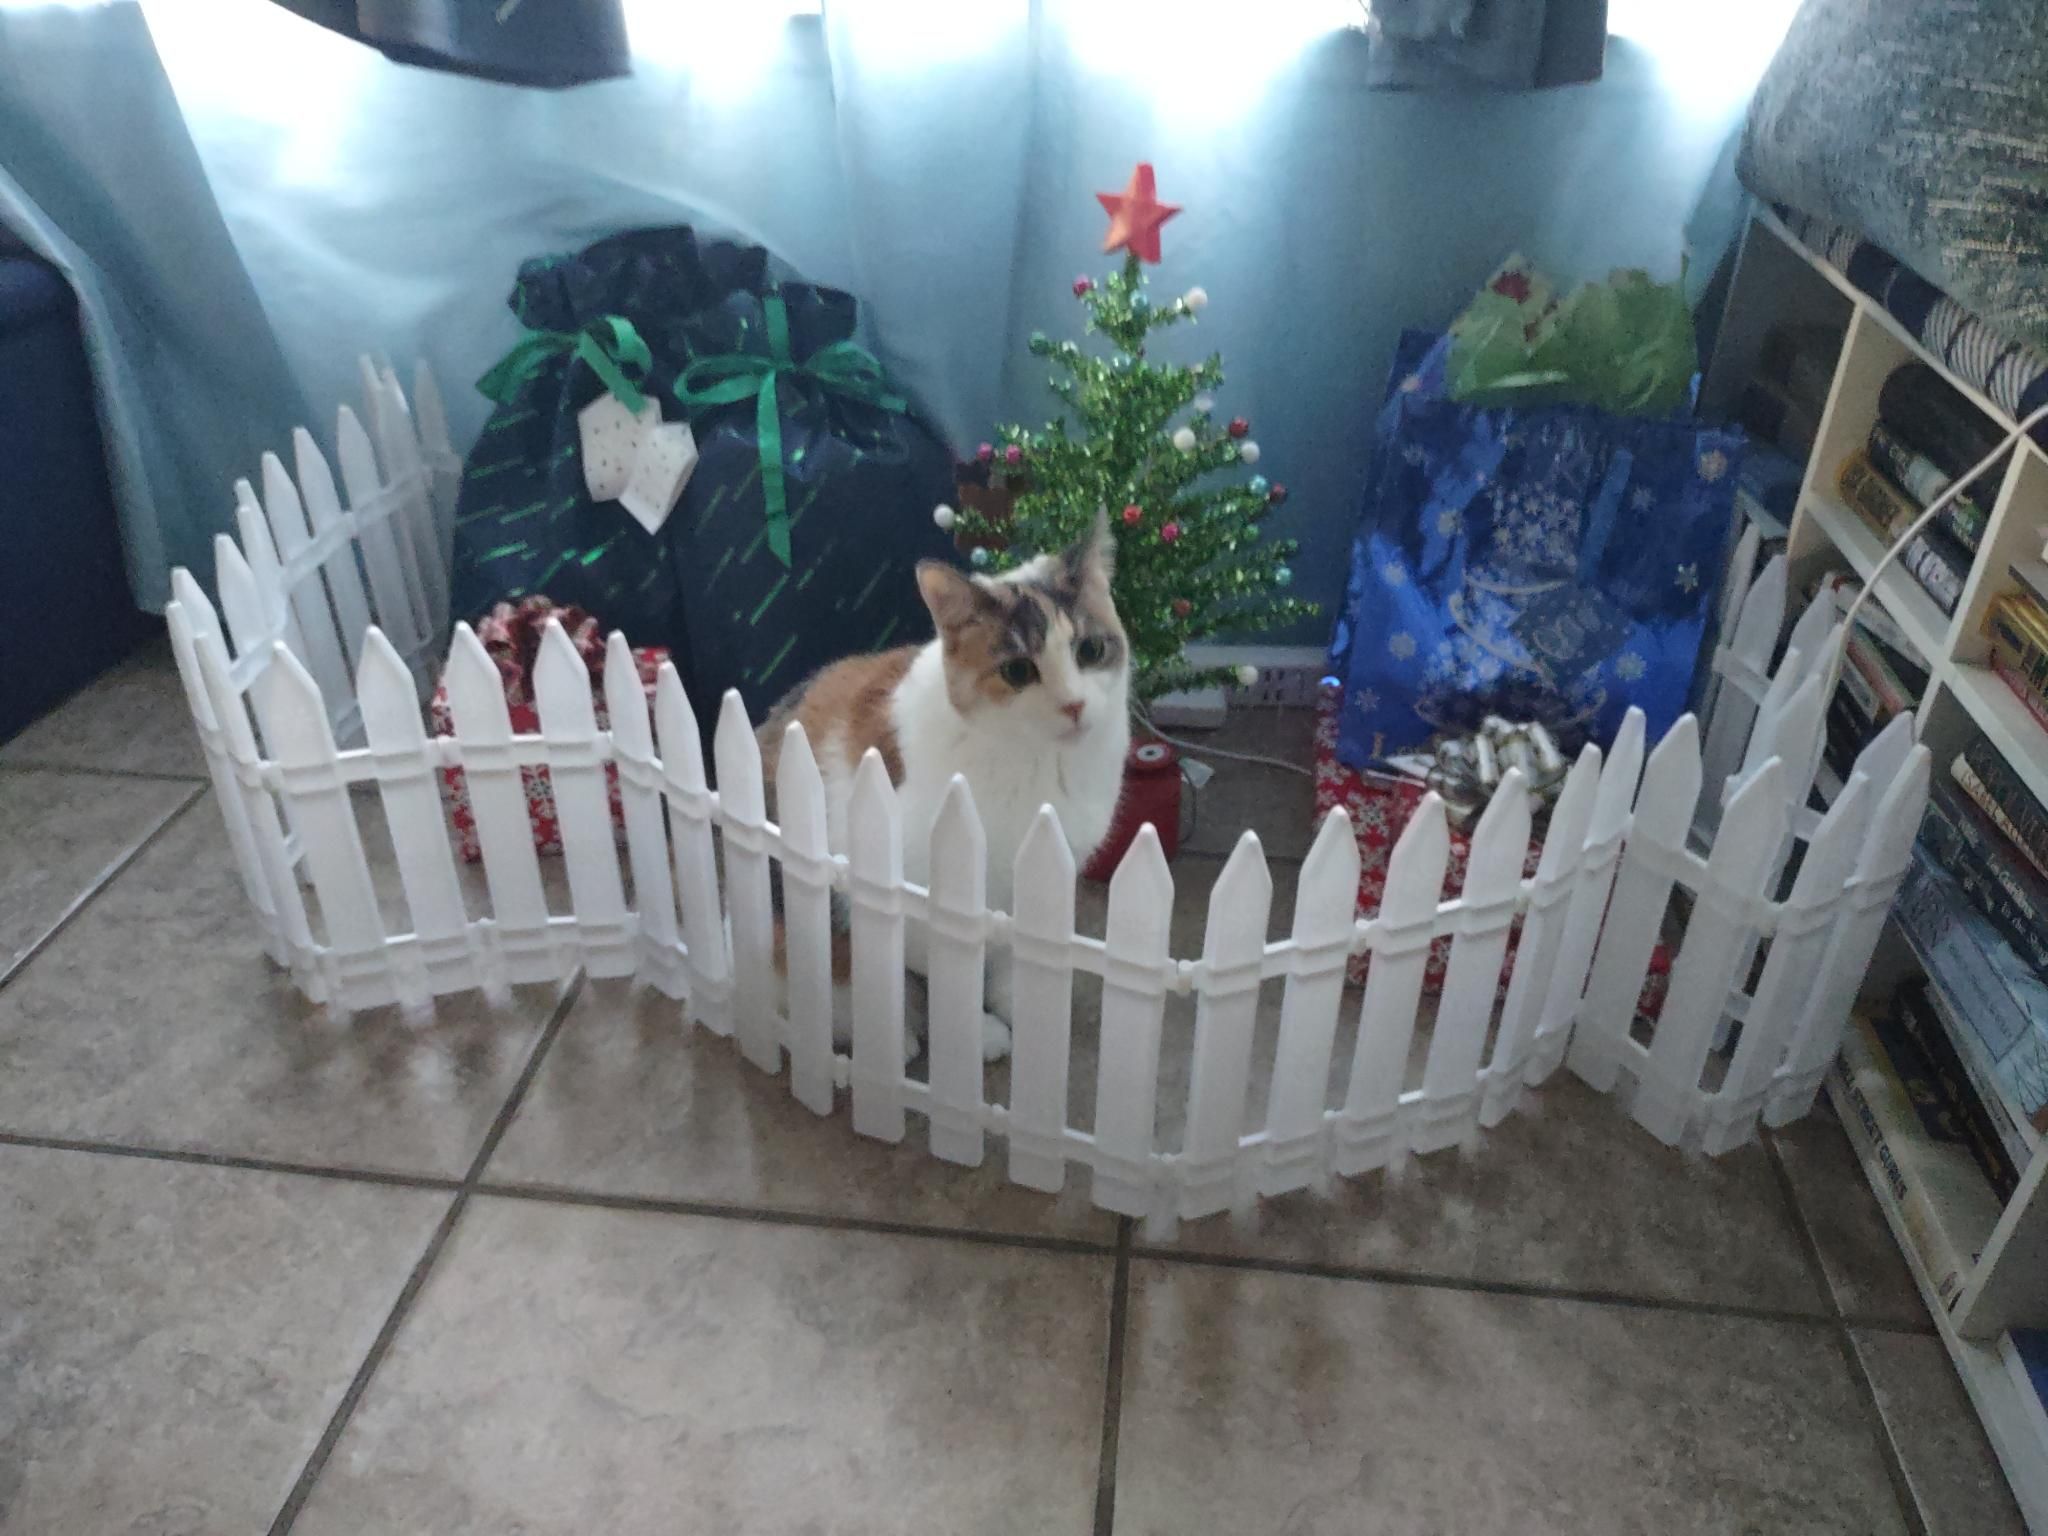 Bought a small fence to keep the cat away from the gifts. Saw this the next day. Money well spent...